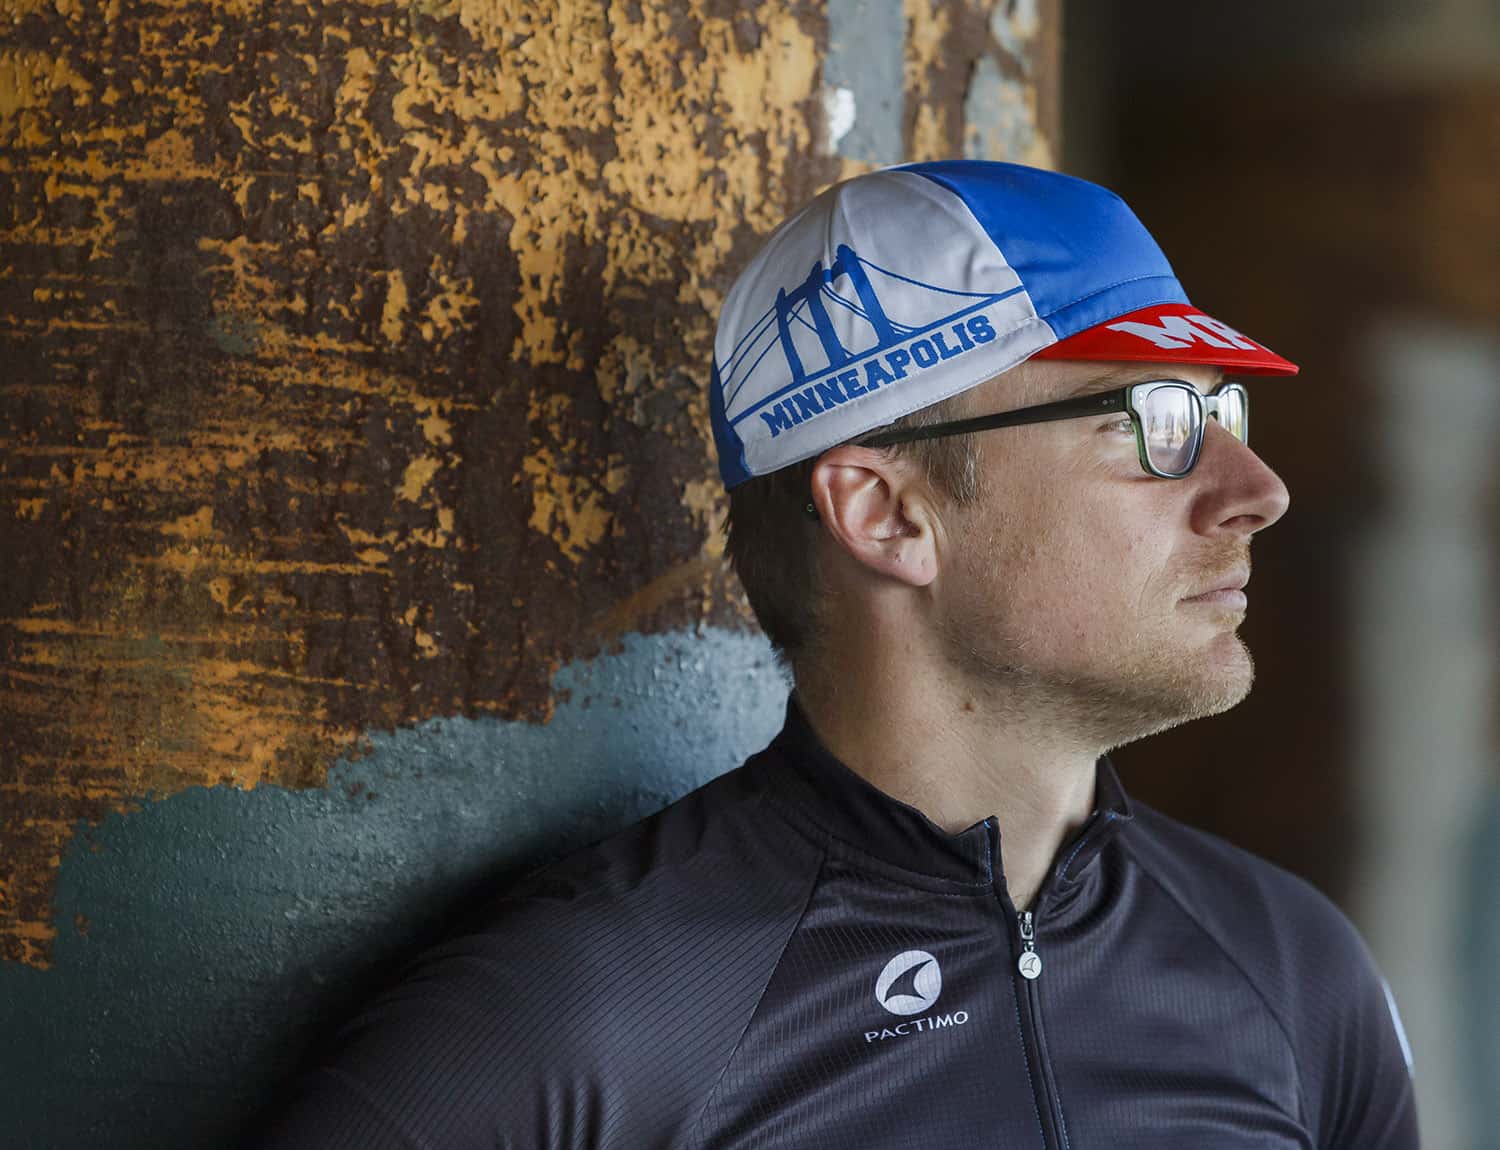 Person wearing blue, white, red Hennepin Bridge cycling cap outside